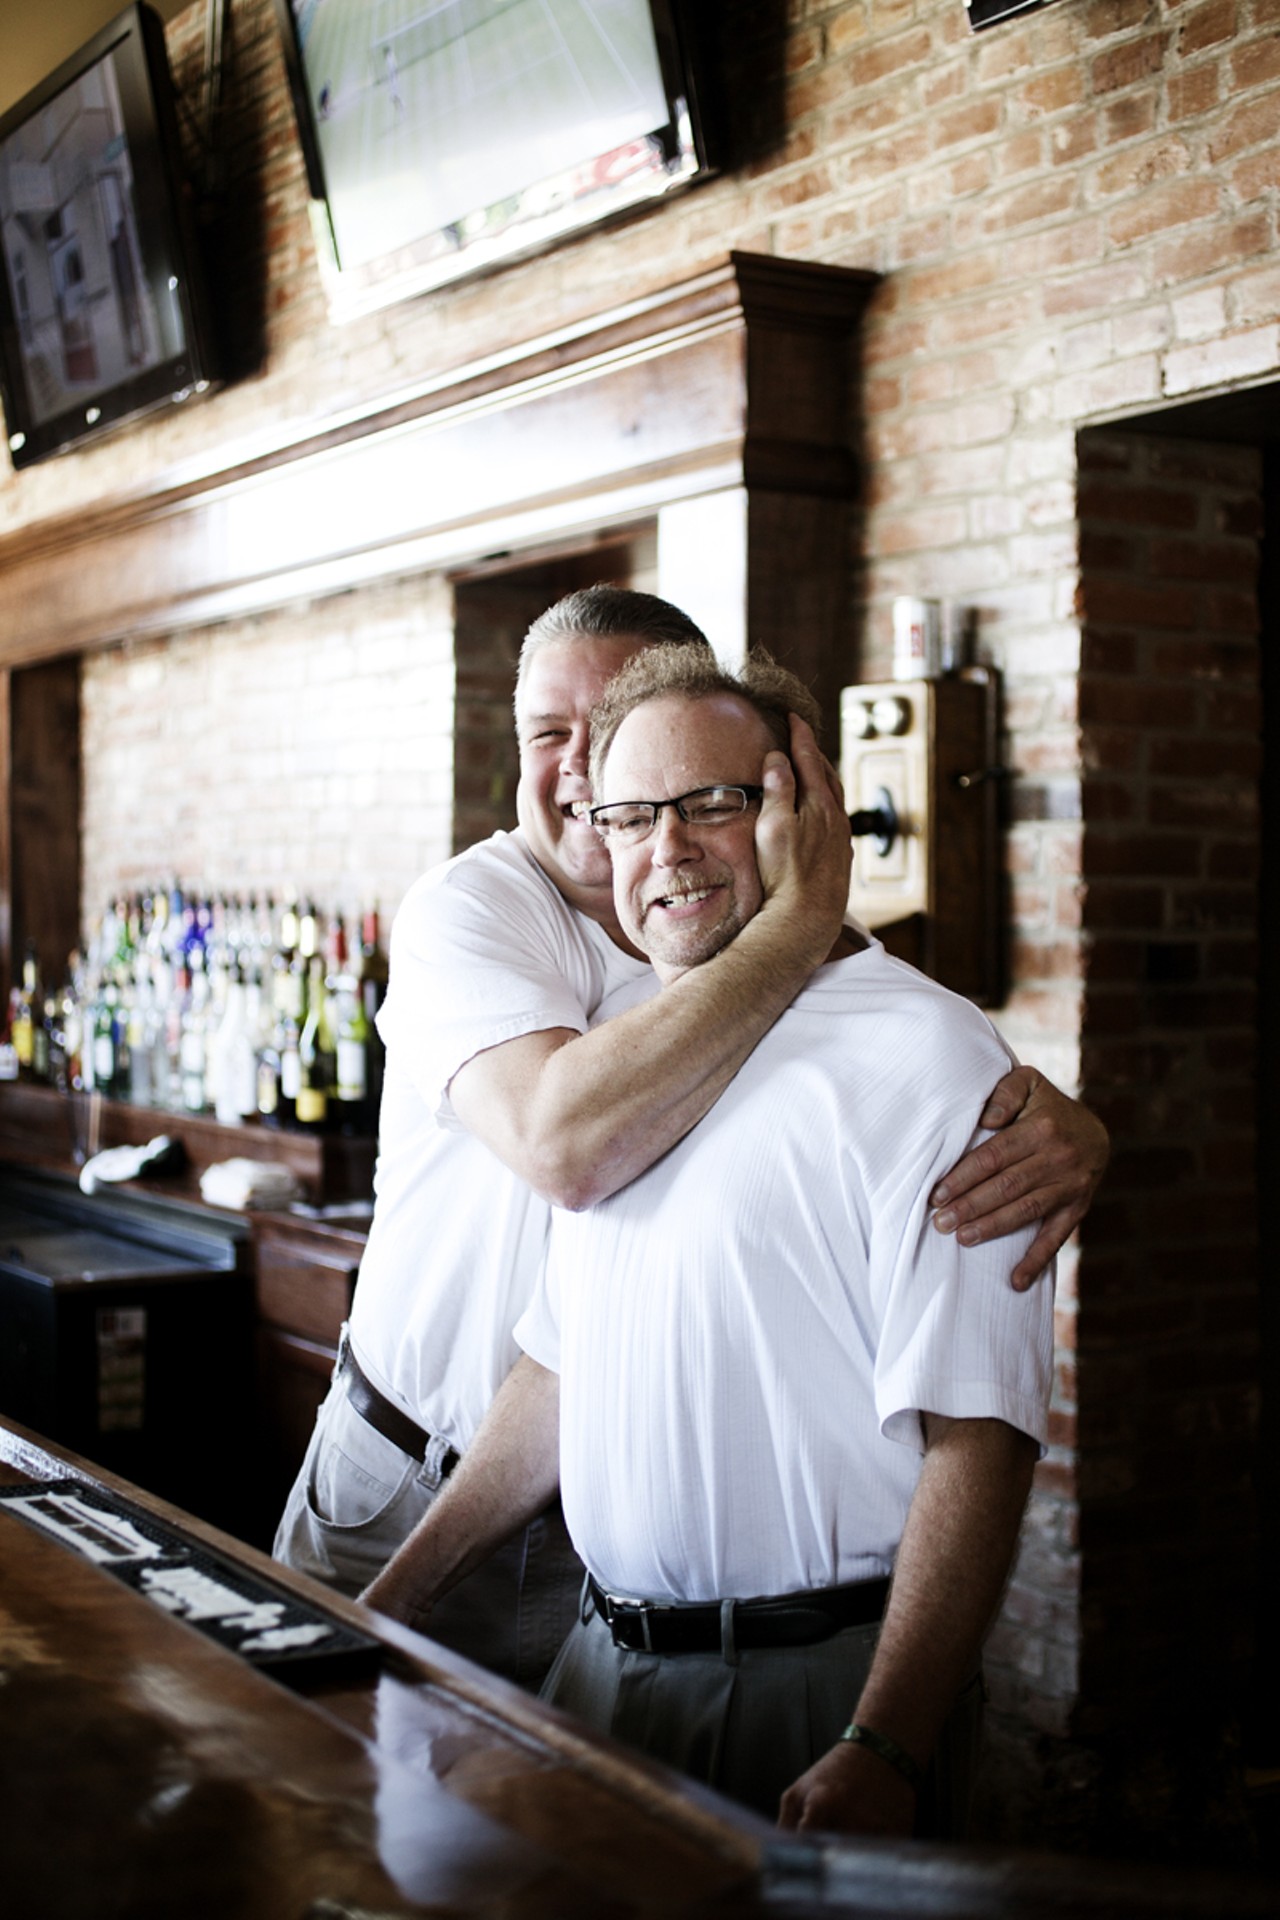 Owners of Quincy Street Bistro. In front is Kevin Winkler and behind him is Mike Enright. Mike, a general contractor and owner of Enright Construction, did all the renovations of the space that was formerly Jimmy's Saloon. And his childhood friend, Kevin, is both his business partner and Executive Chef.